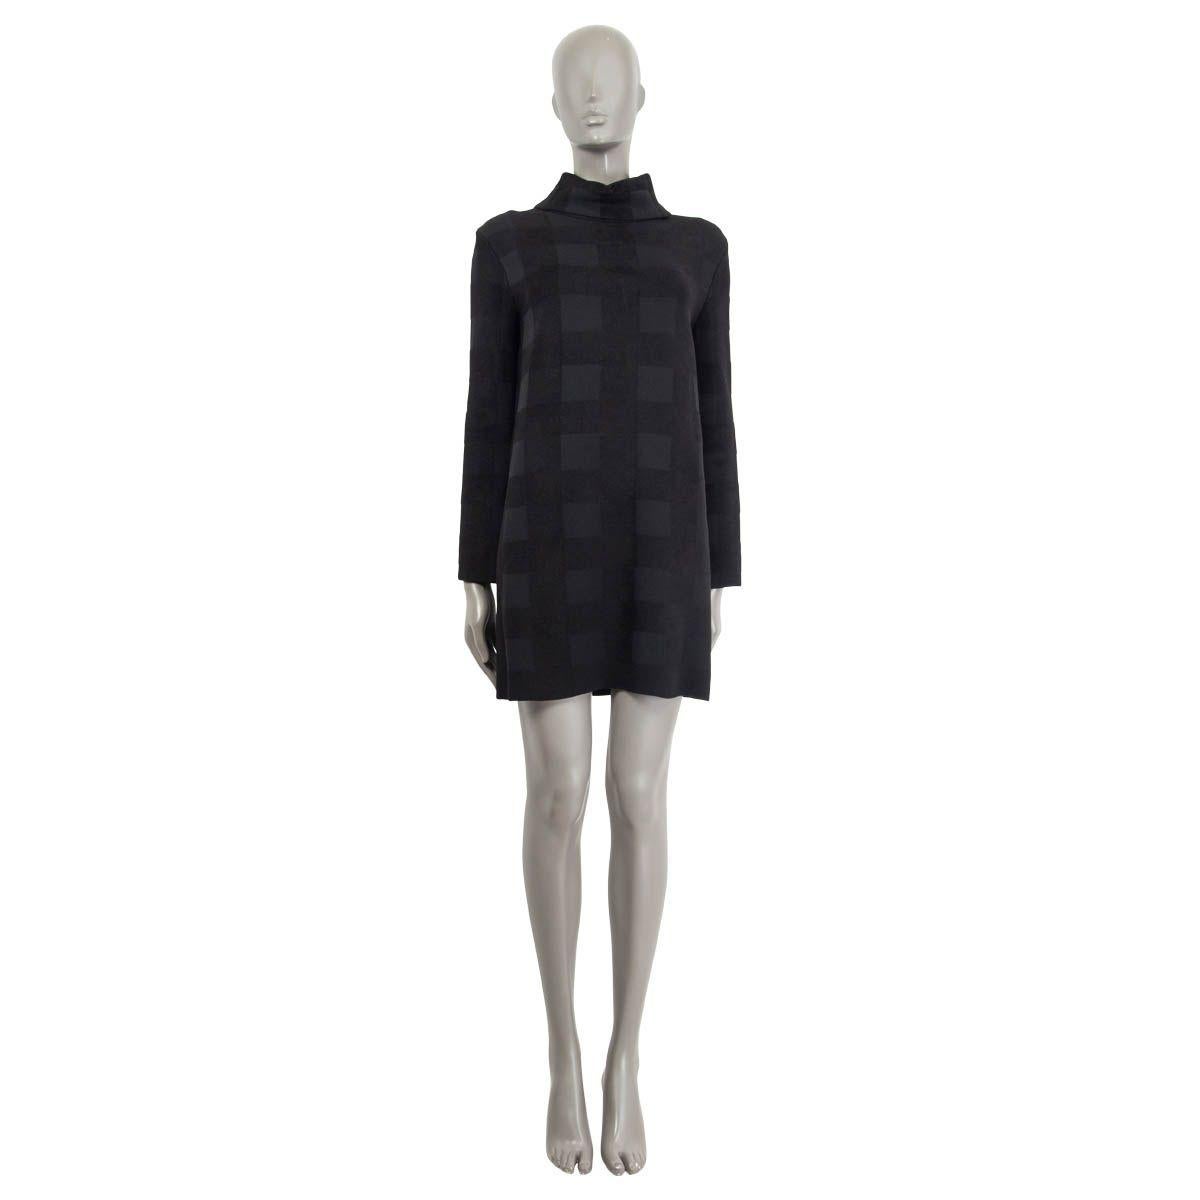 100% authentic Céline high neck knit dress in black and charcoal viscose (73%), polyamide (22%), polyester (3%) and elastane (2%). Features long sleeves and a check print. Unlined. Has been worn and is in excellent condition.

Measurements
Tag